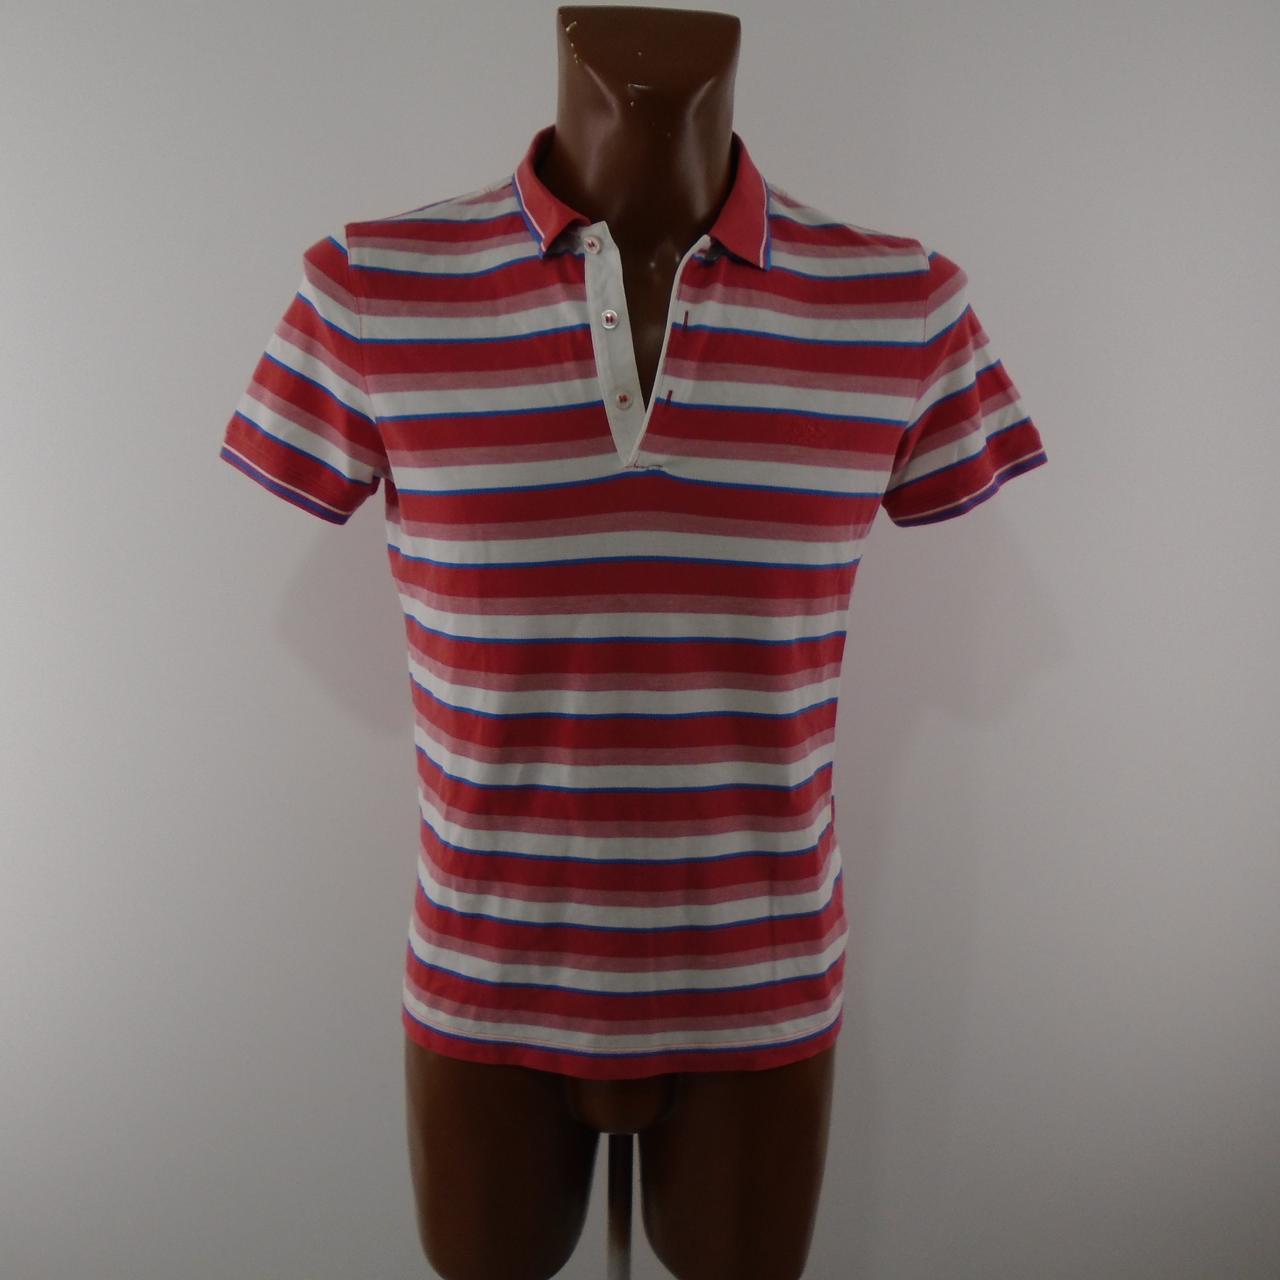 Men's Polo Hugo Boss. Multicolor. S. New without tags